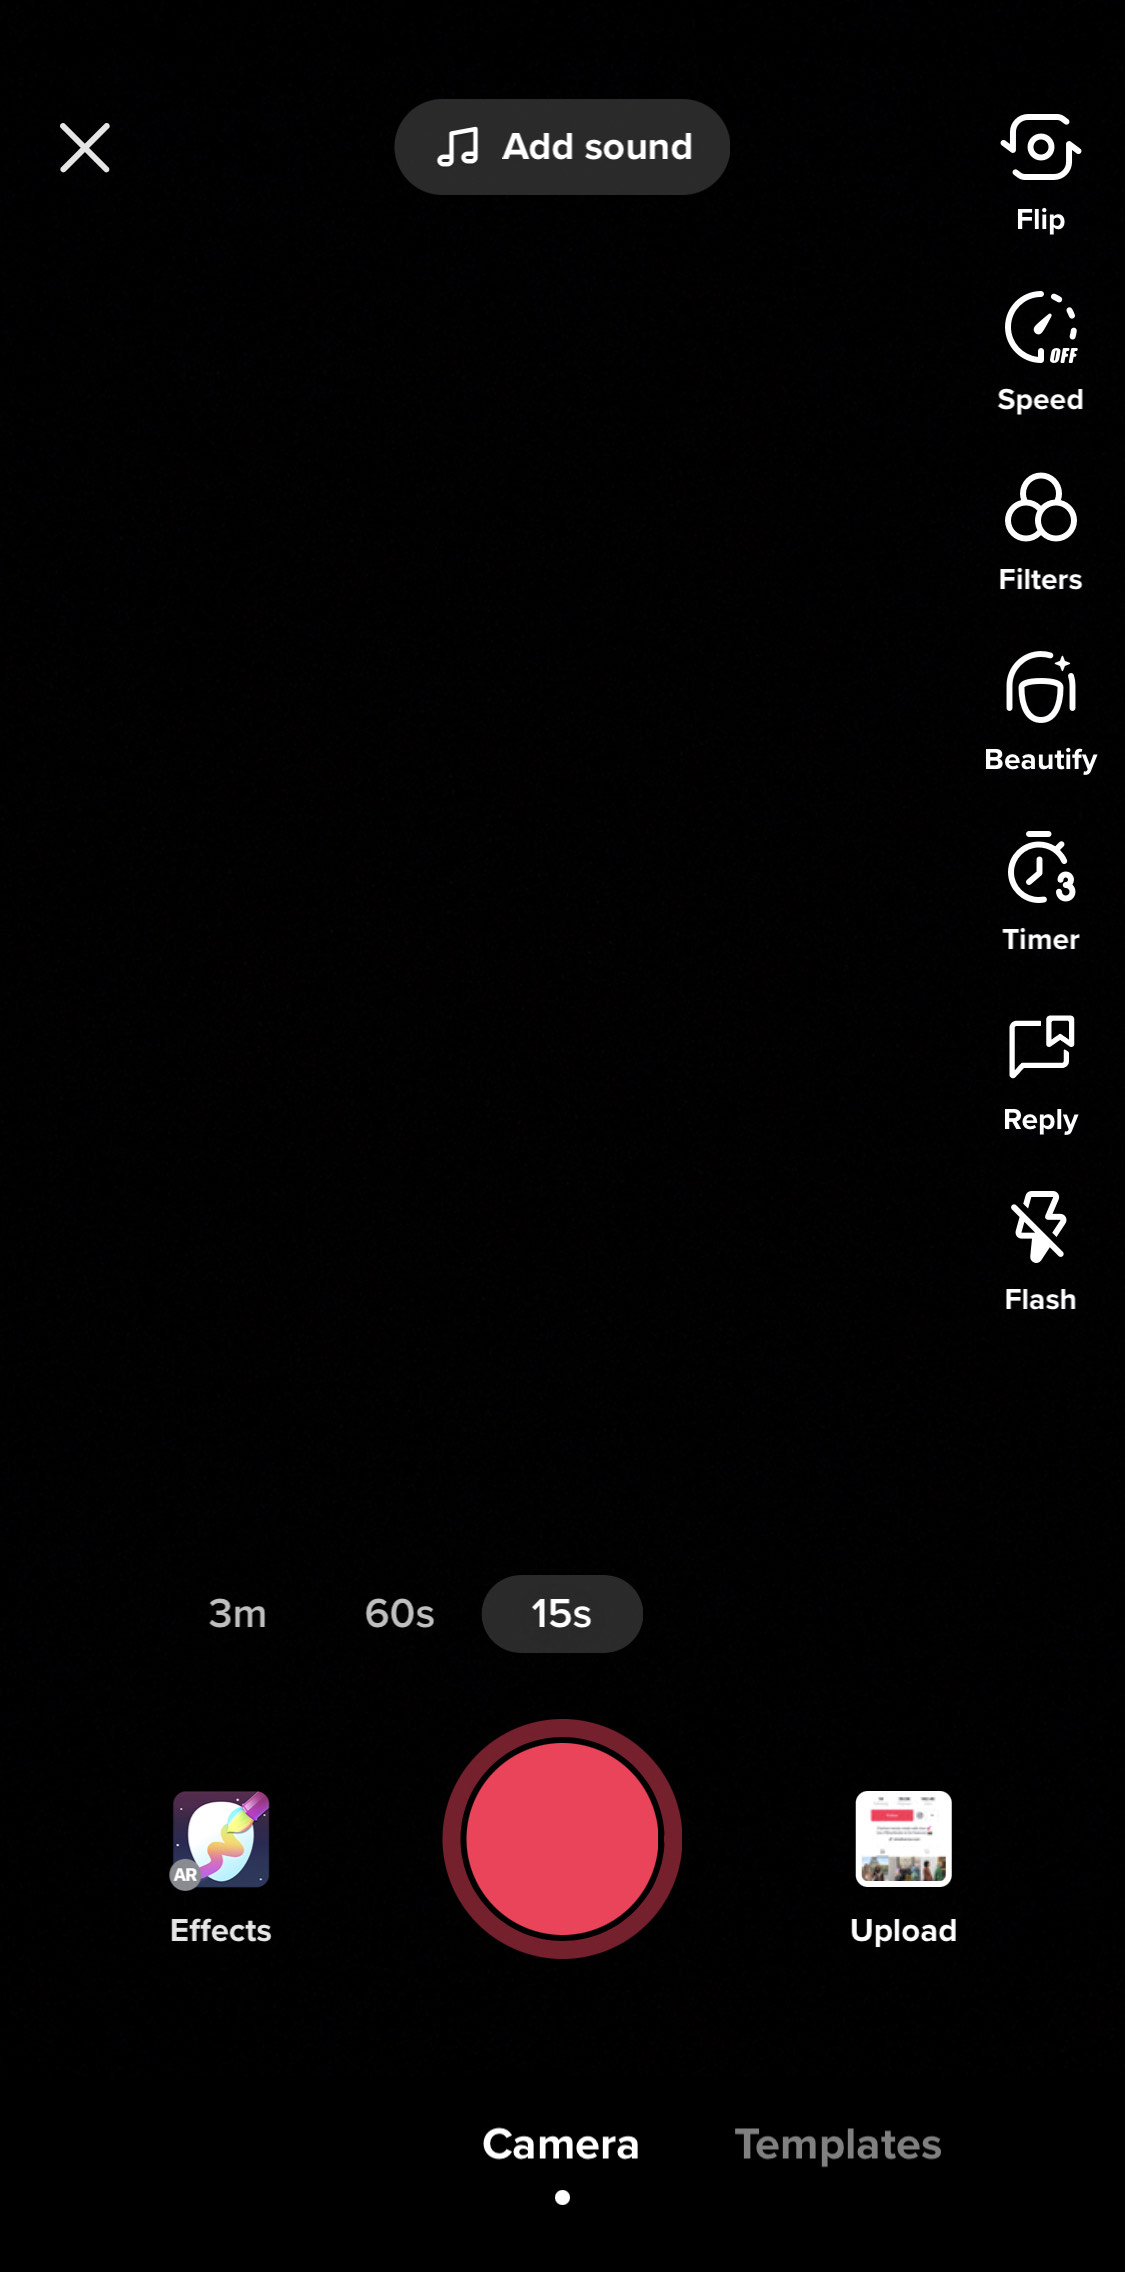 Black screen showing the different features and functionality of the camera in TikTok.